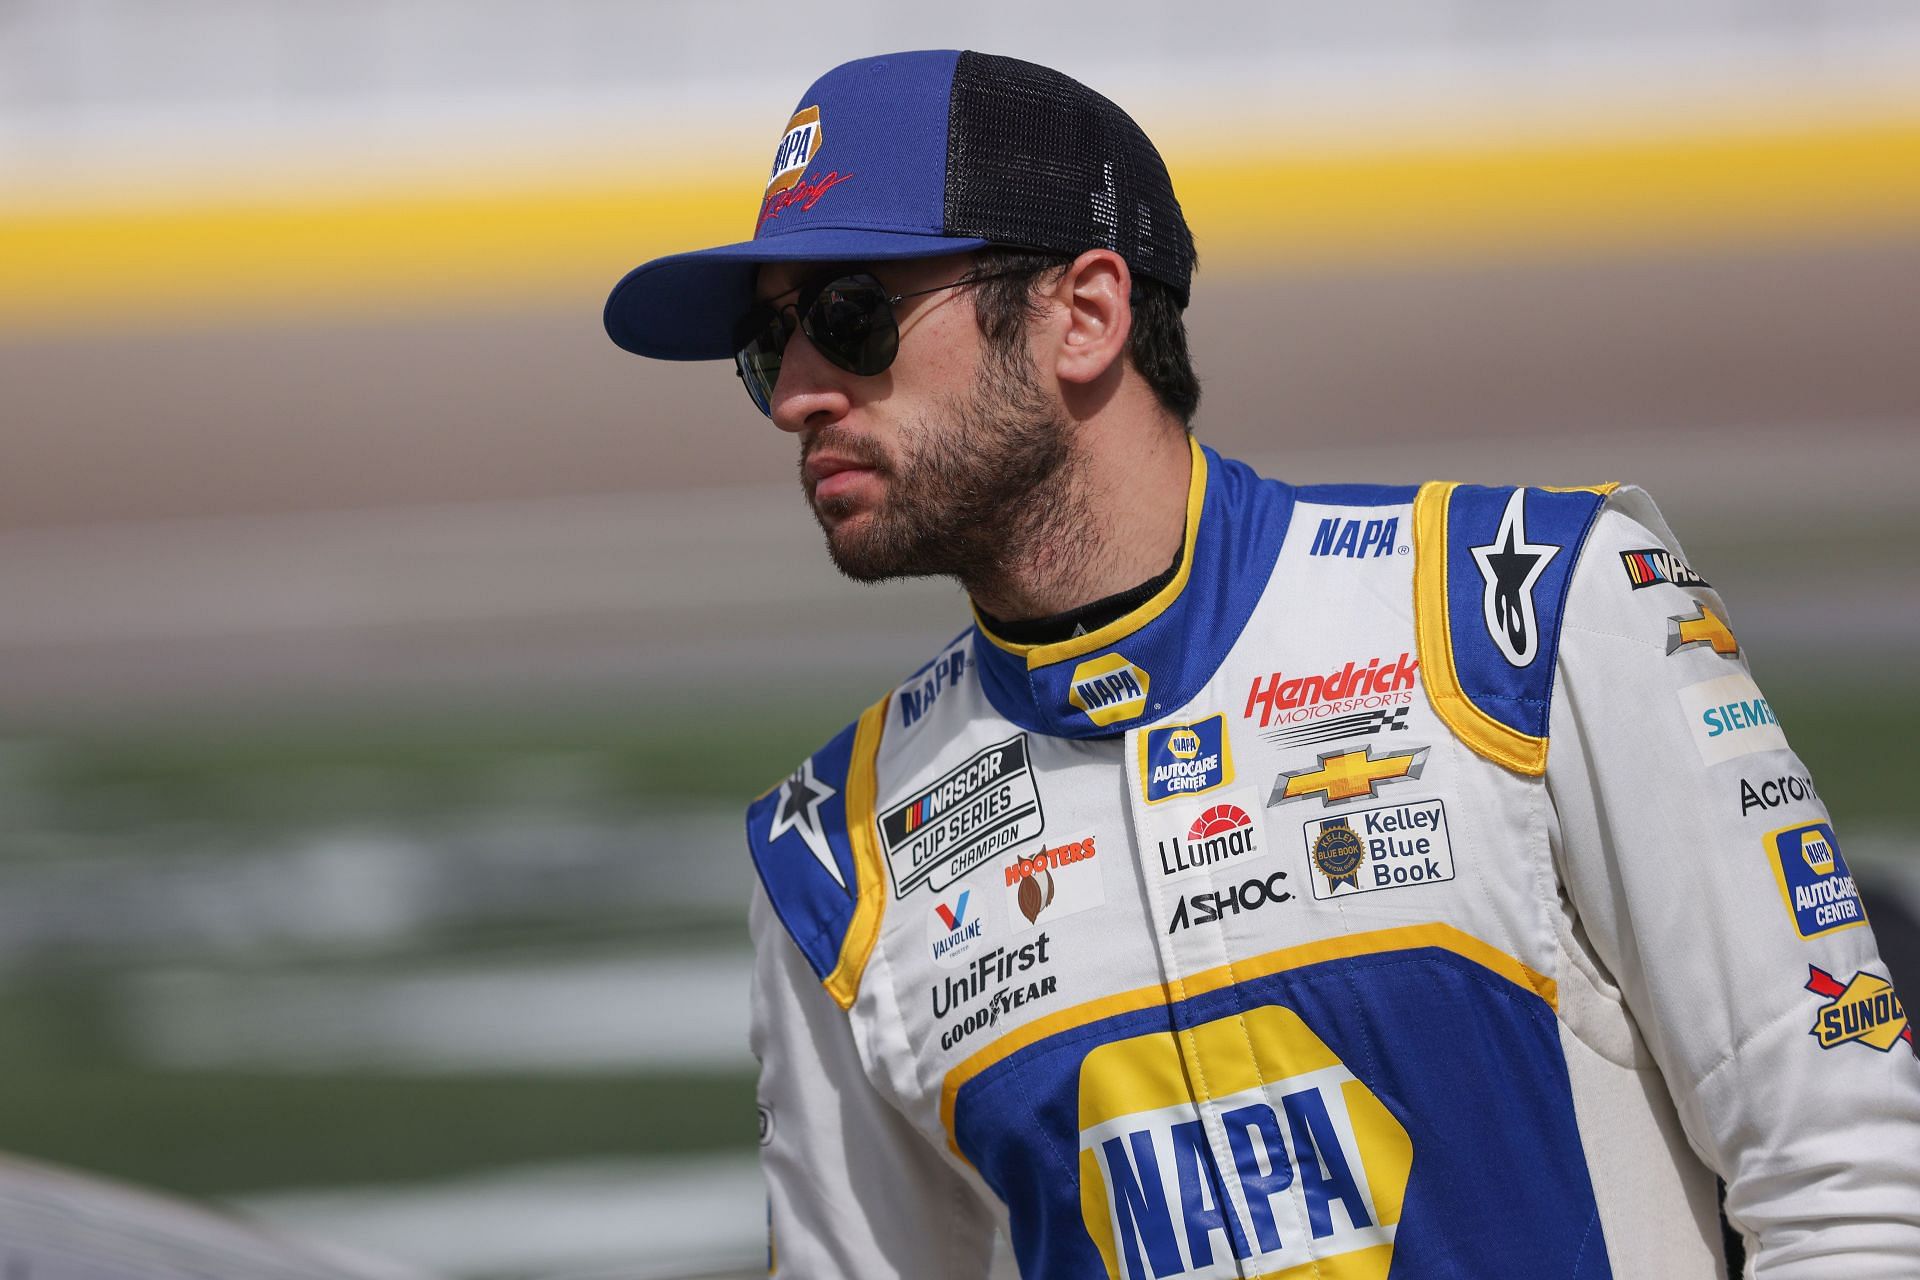 Chase Elliott at NASCAR Cup Series Pennzoil 400 - Practice